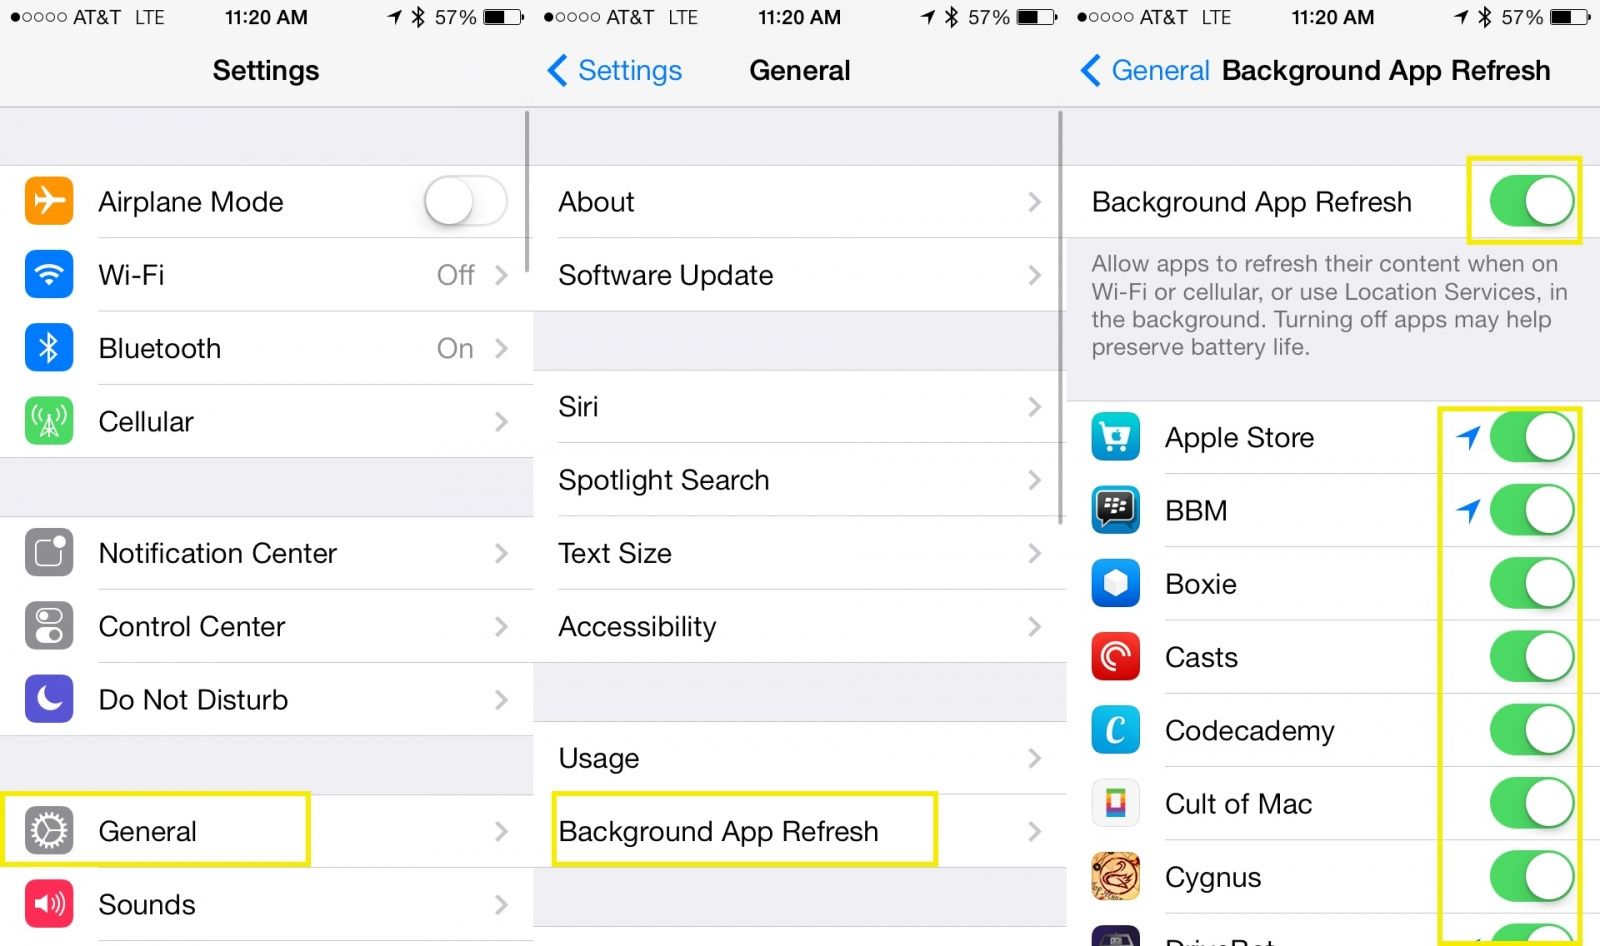 How To Save Some Battery Life With Background App Refresh [iOS Tips] | Cult  of Mac